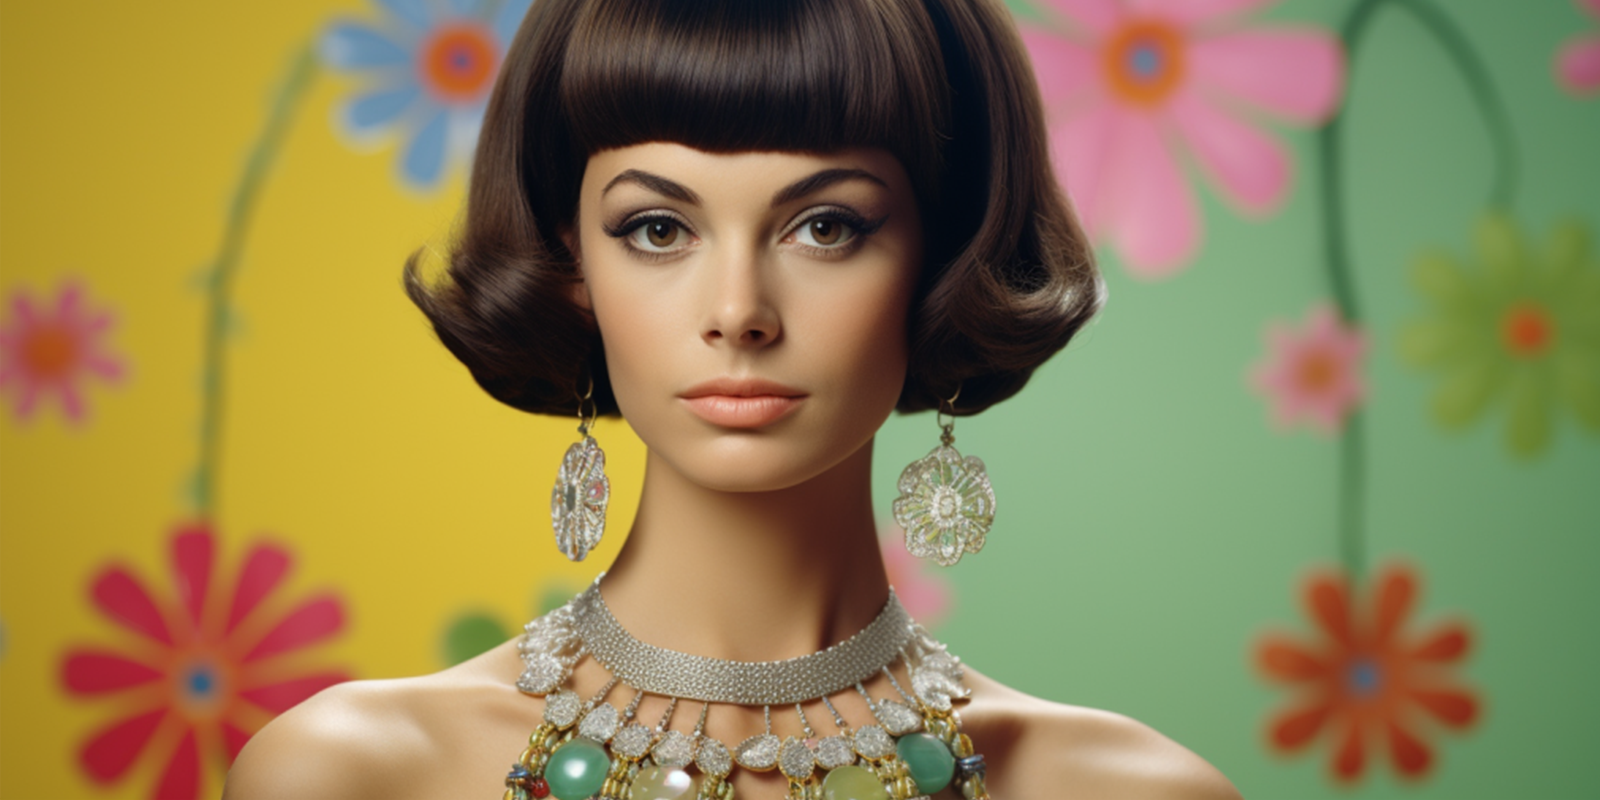 Featured image of 1960s woman with short brown hair wearing long flower earrings and geometric necklace with flower patterns in the background